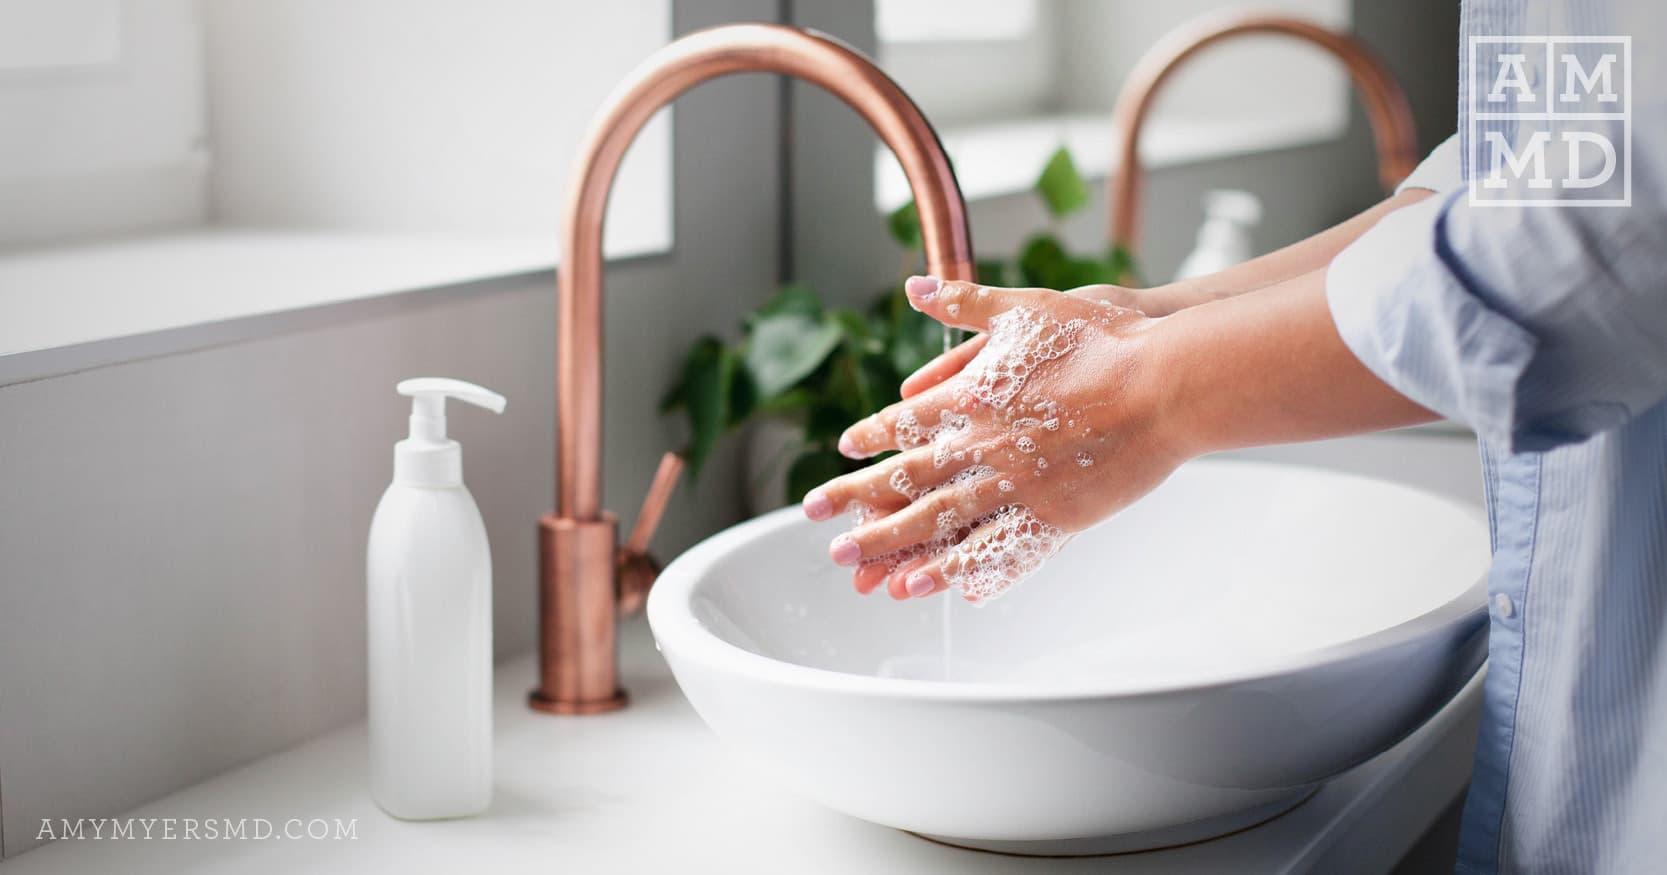 Your Skin Microbiome: Are You Washing Too Much?